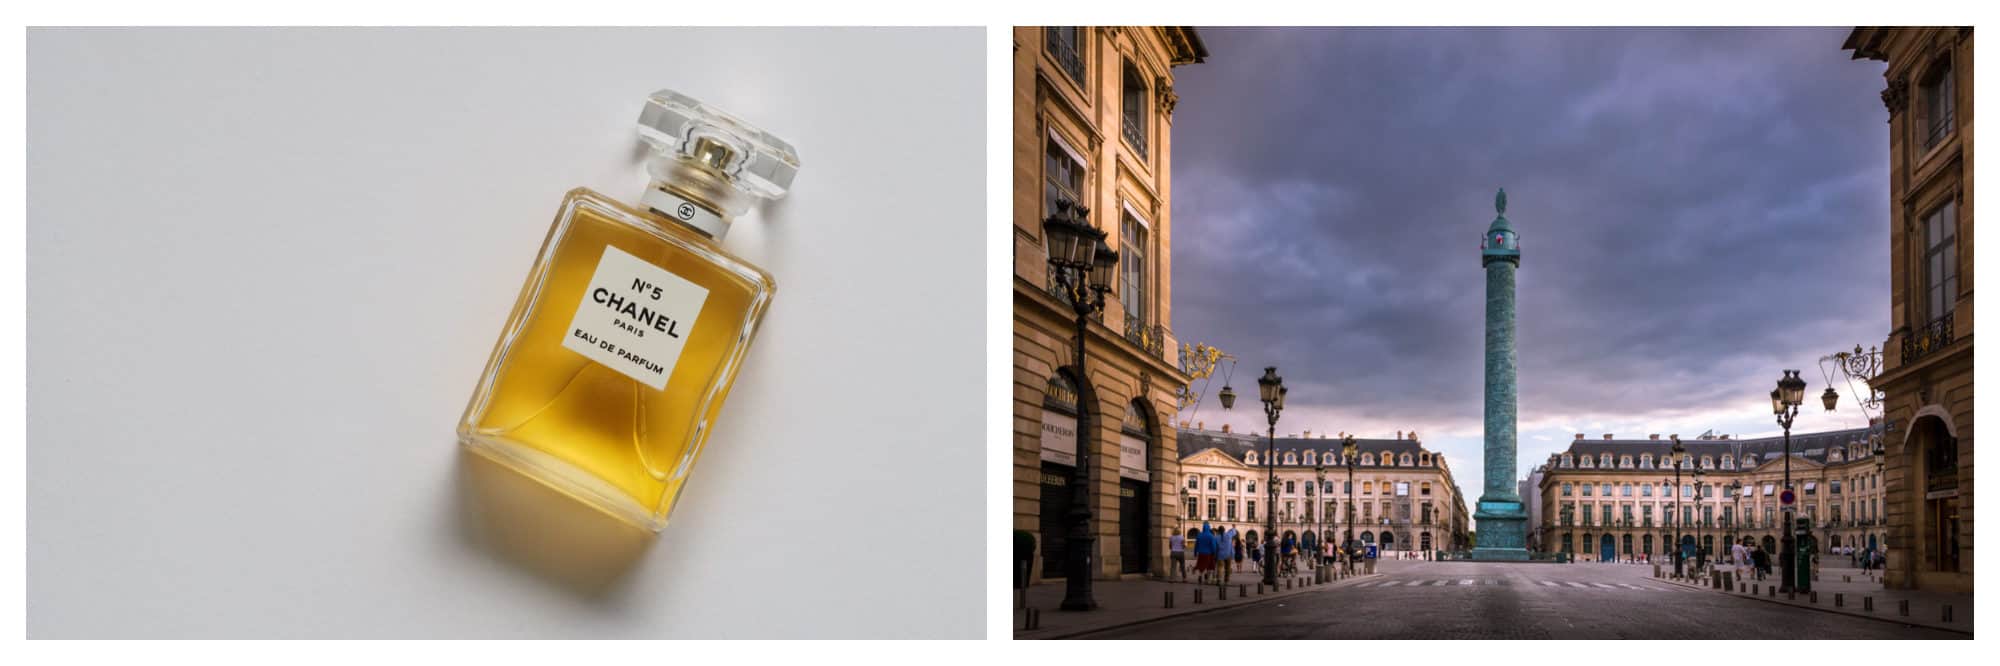 Get the right perfume from Chanel in Paris (left), and the right jewelry from iconic Place Vendome (right).